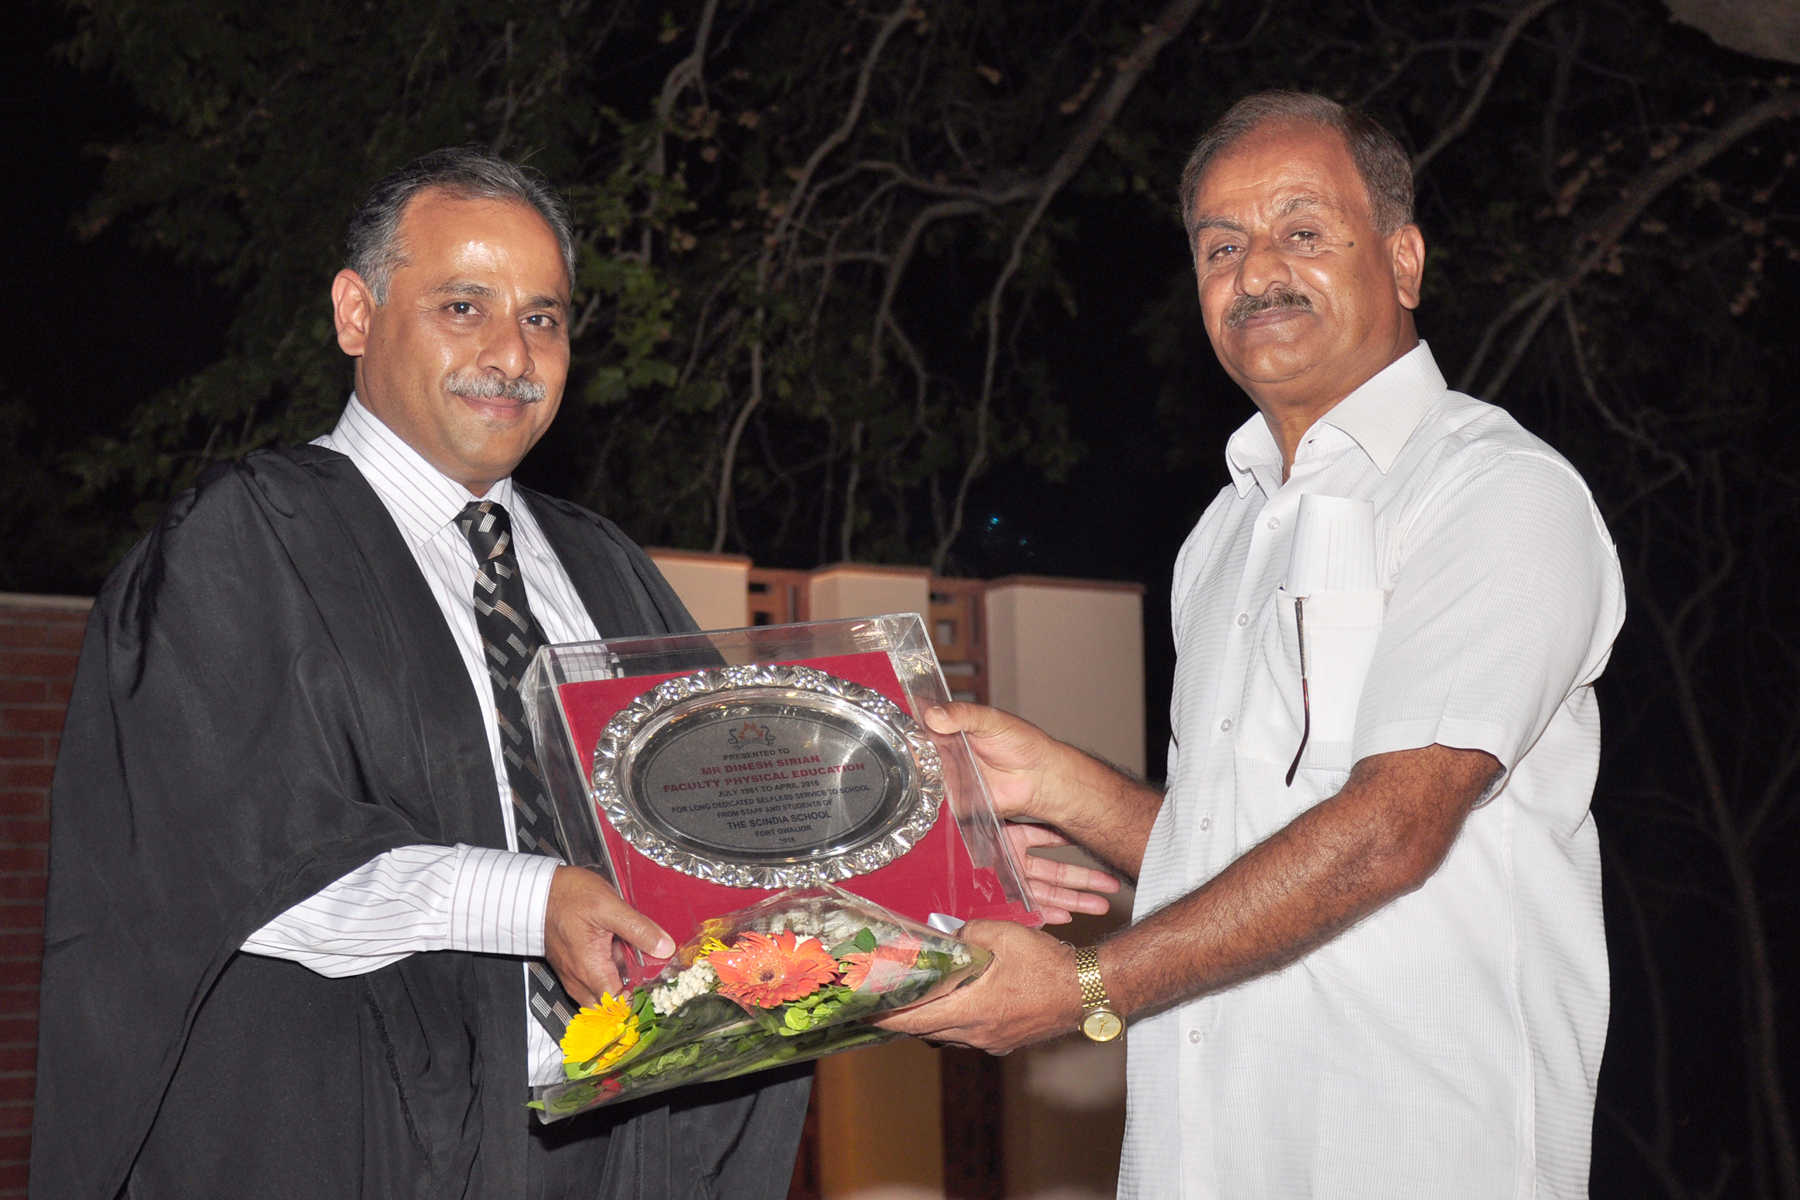 Mr Dinesh Siriah retires after a long and illustrious tenure of 35 years